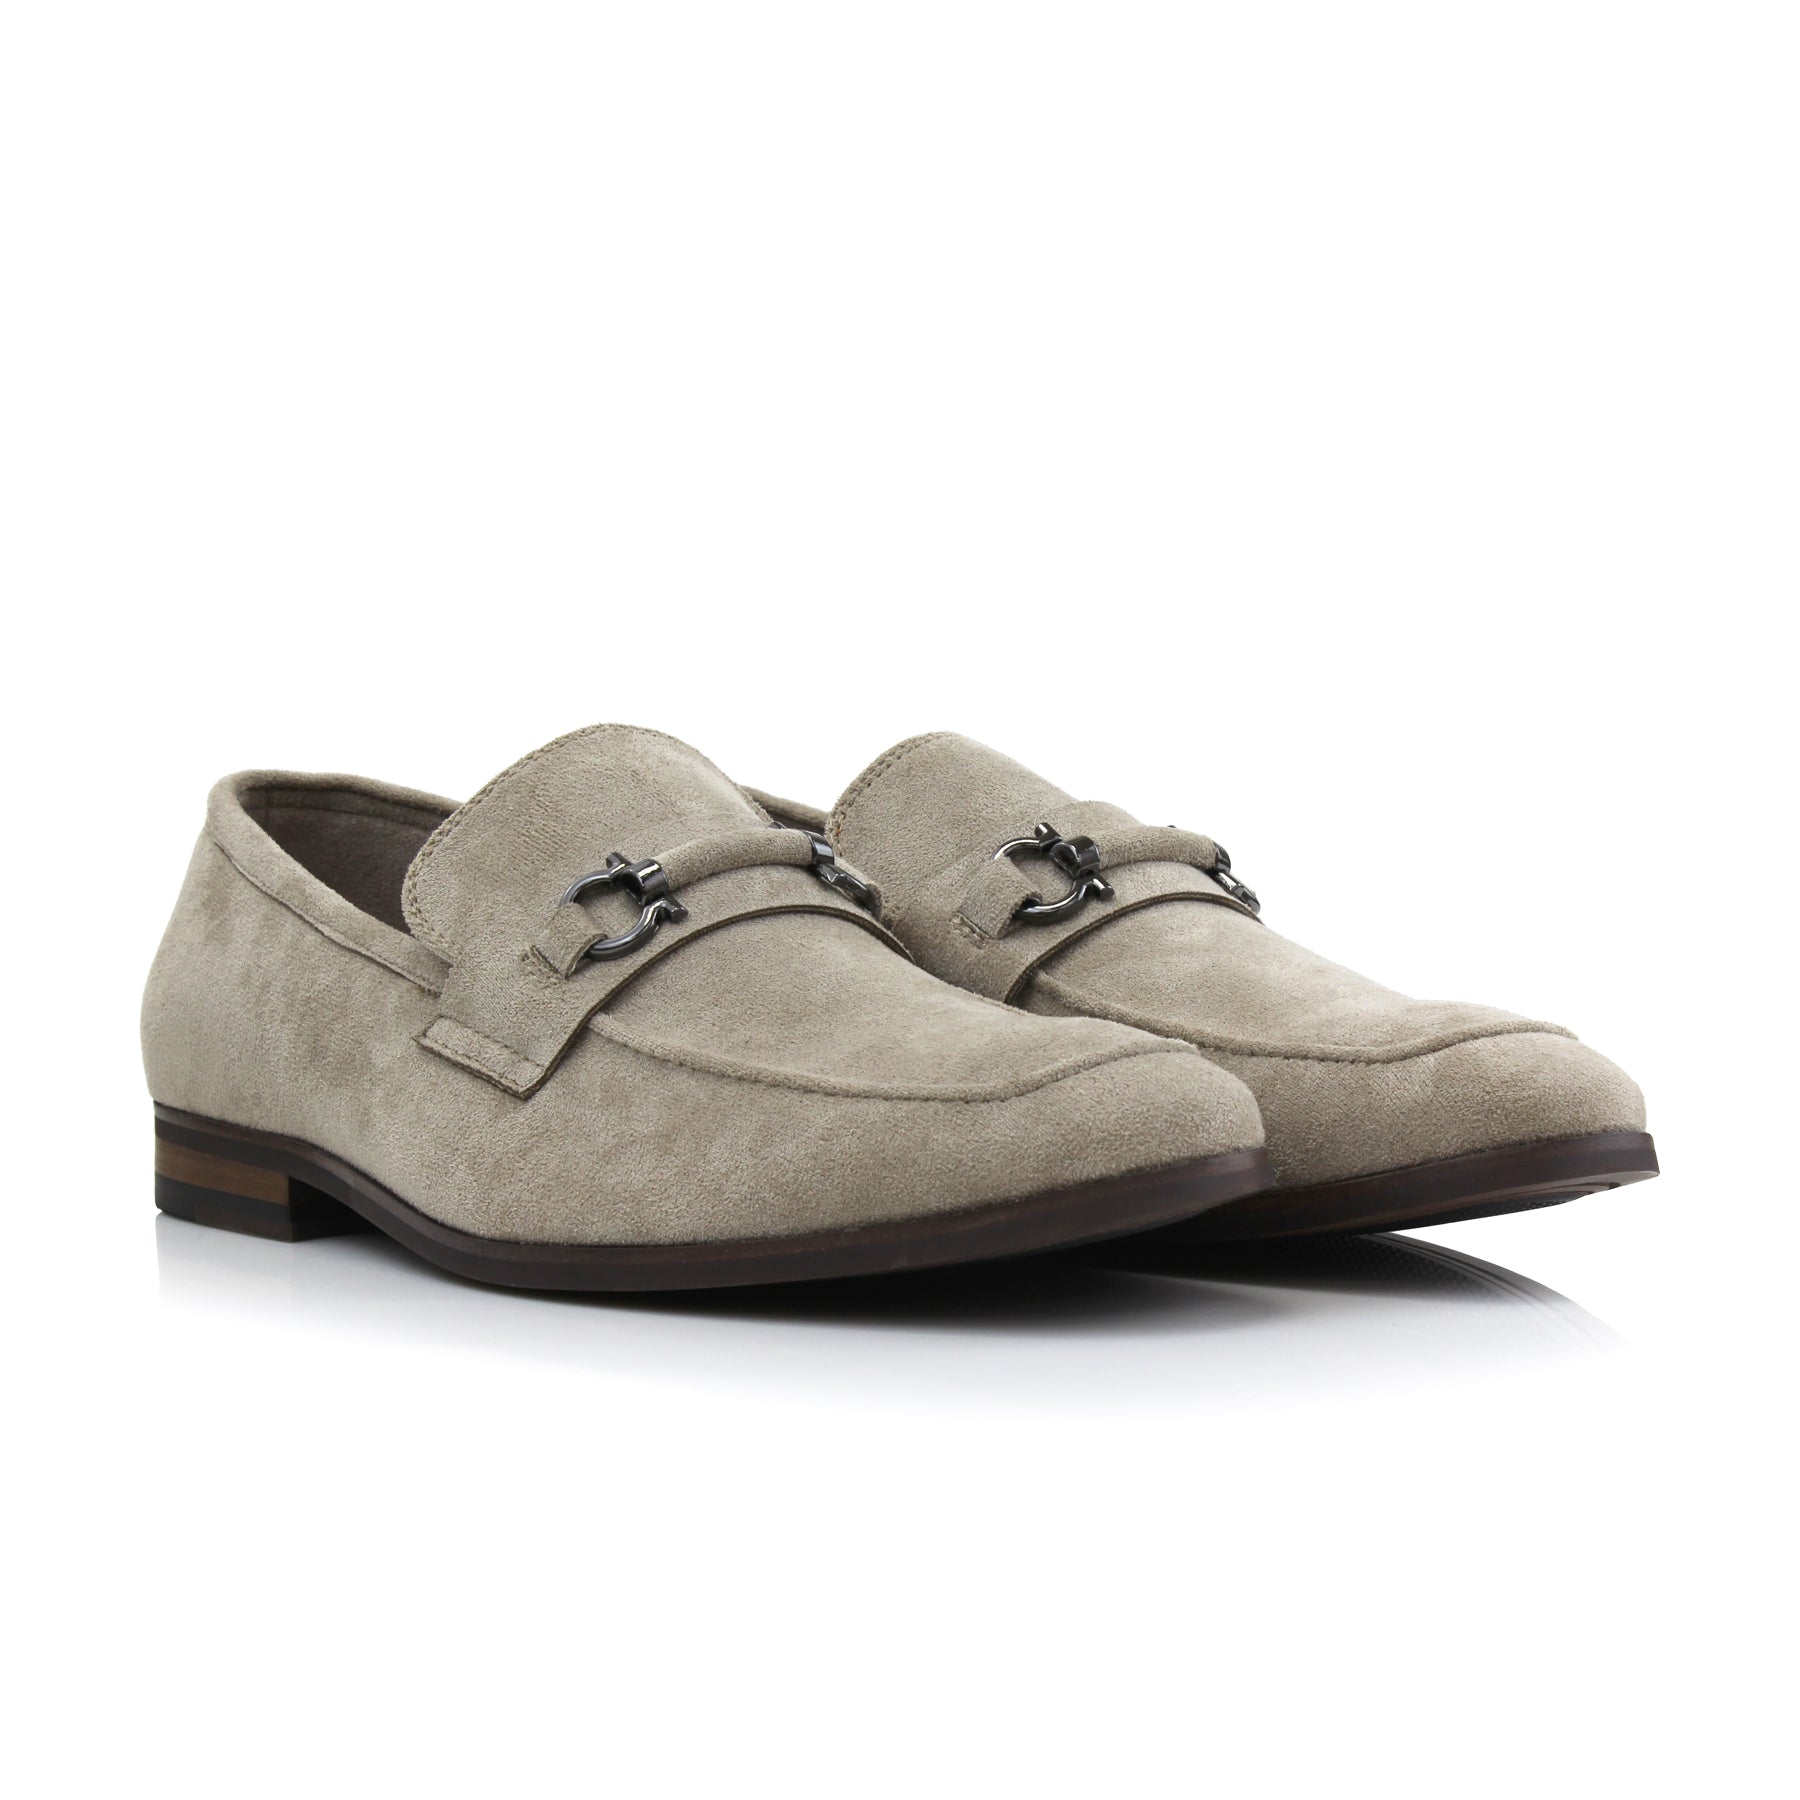 Metal Buckle Suede Loafers | Demitri by Ferro Aldo | Conal Footwear | Paired Angle View